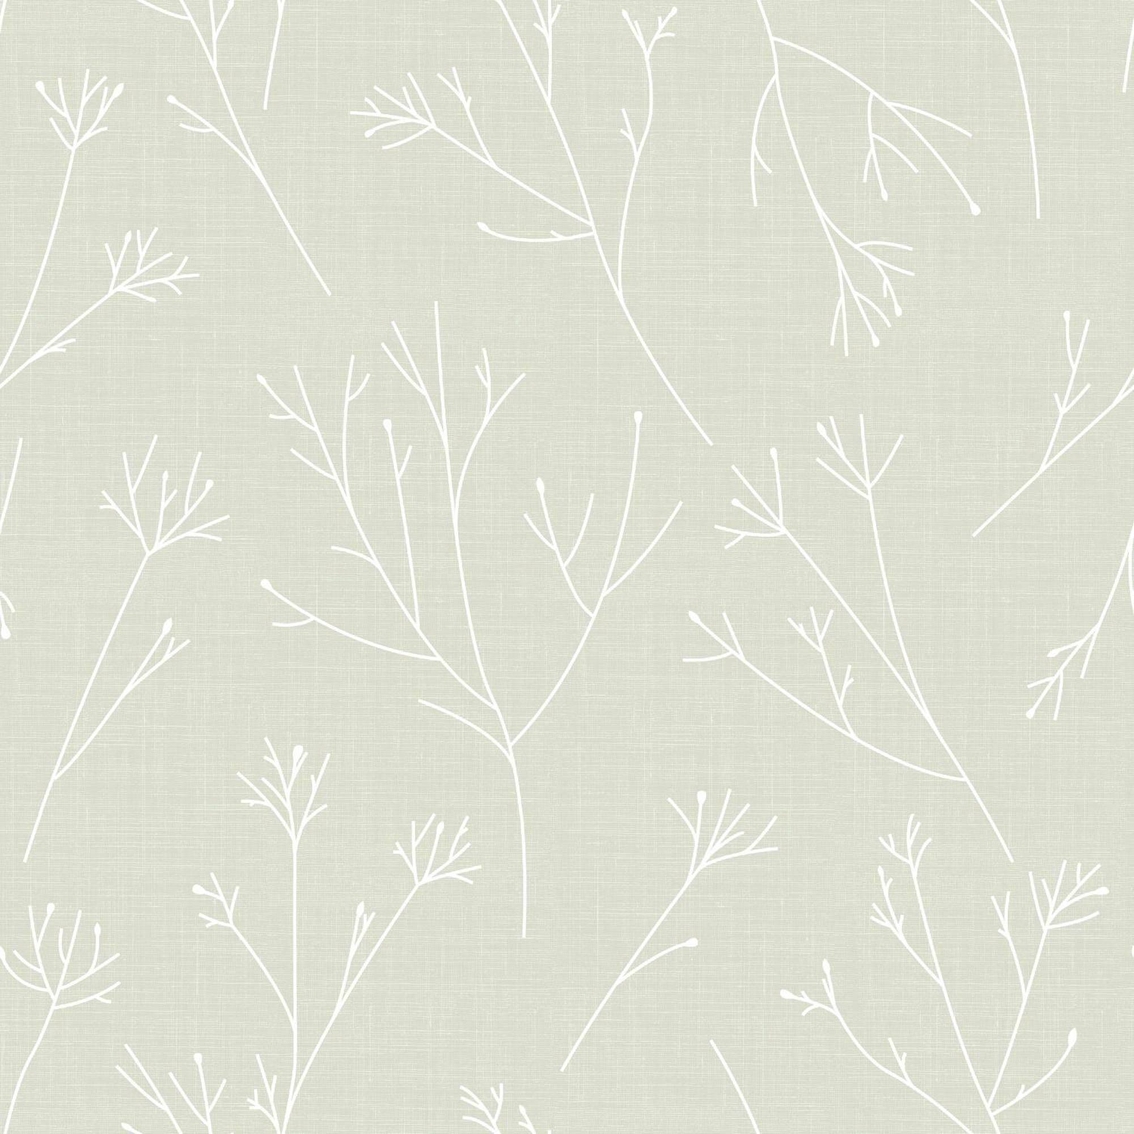 RoomMates Twigs Peel and Stick Wallpaper - Image 6 of 7